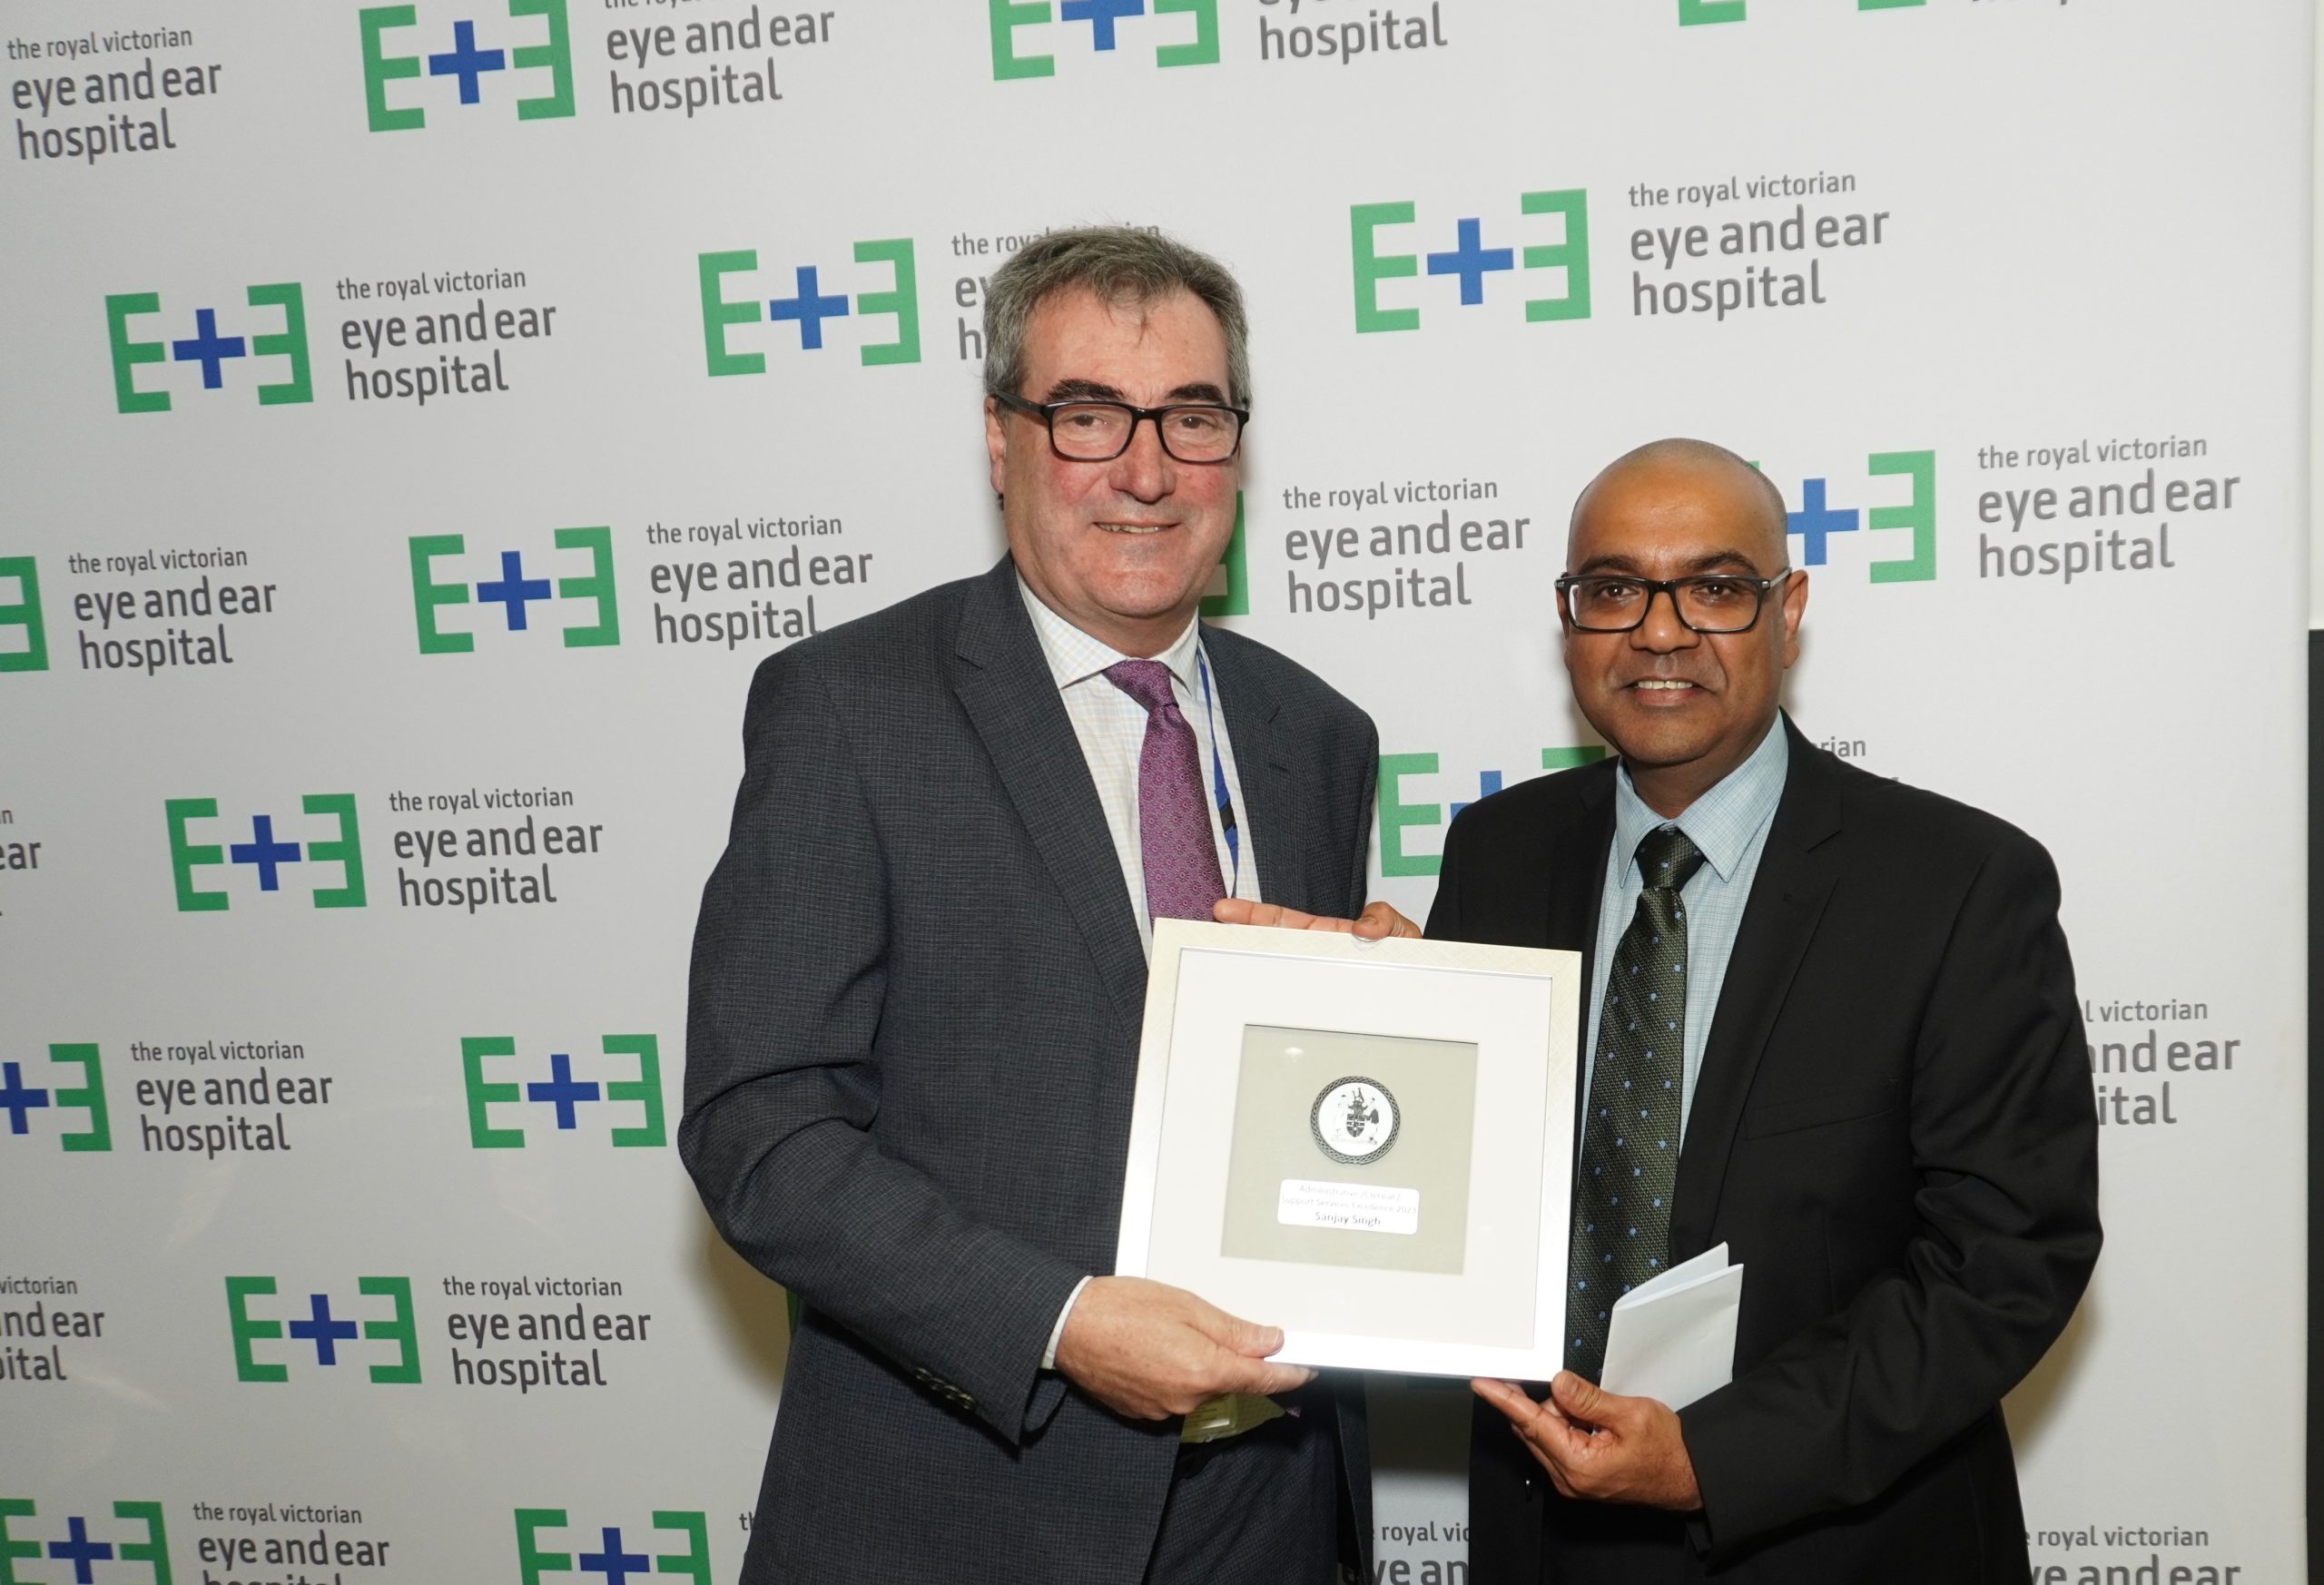 Executive Director Danny Mennuni presenting the Administrative Excellence Award to Sanjay Singh. They stand together smiling against an Eye and Ear logo background